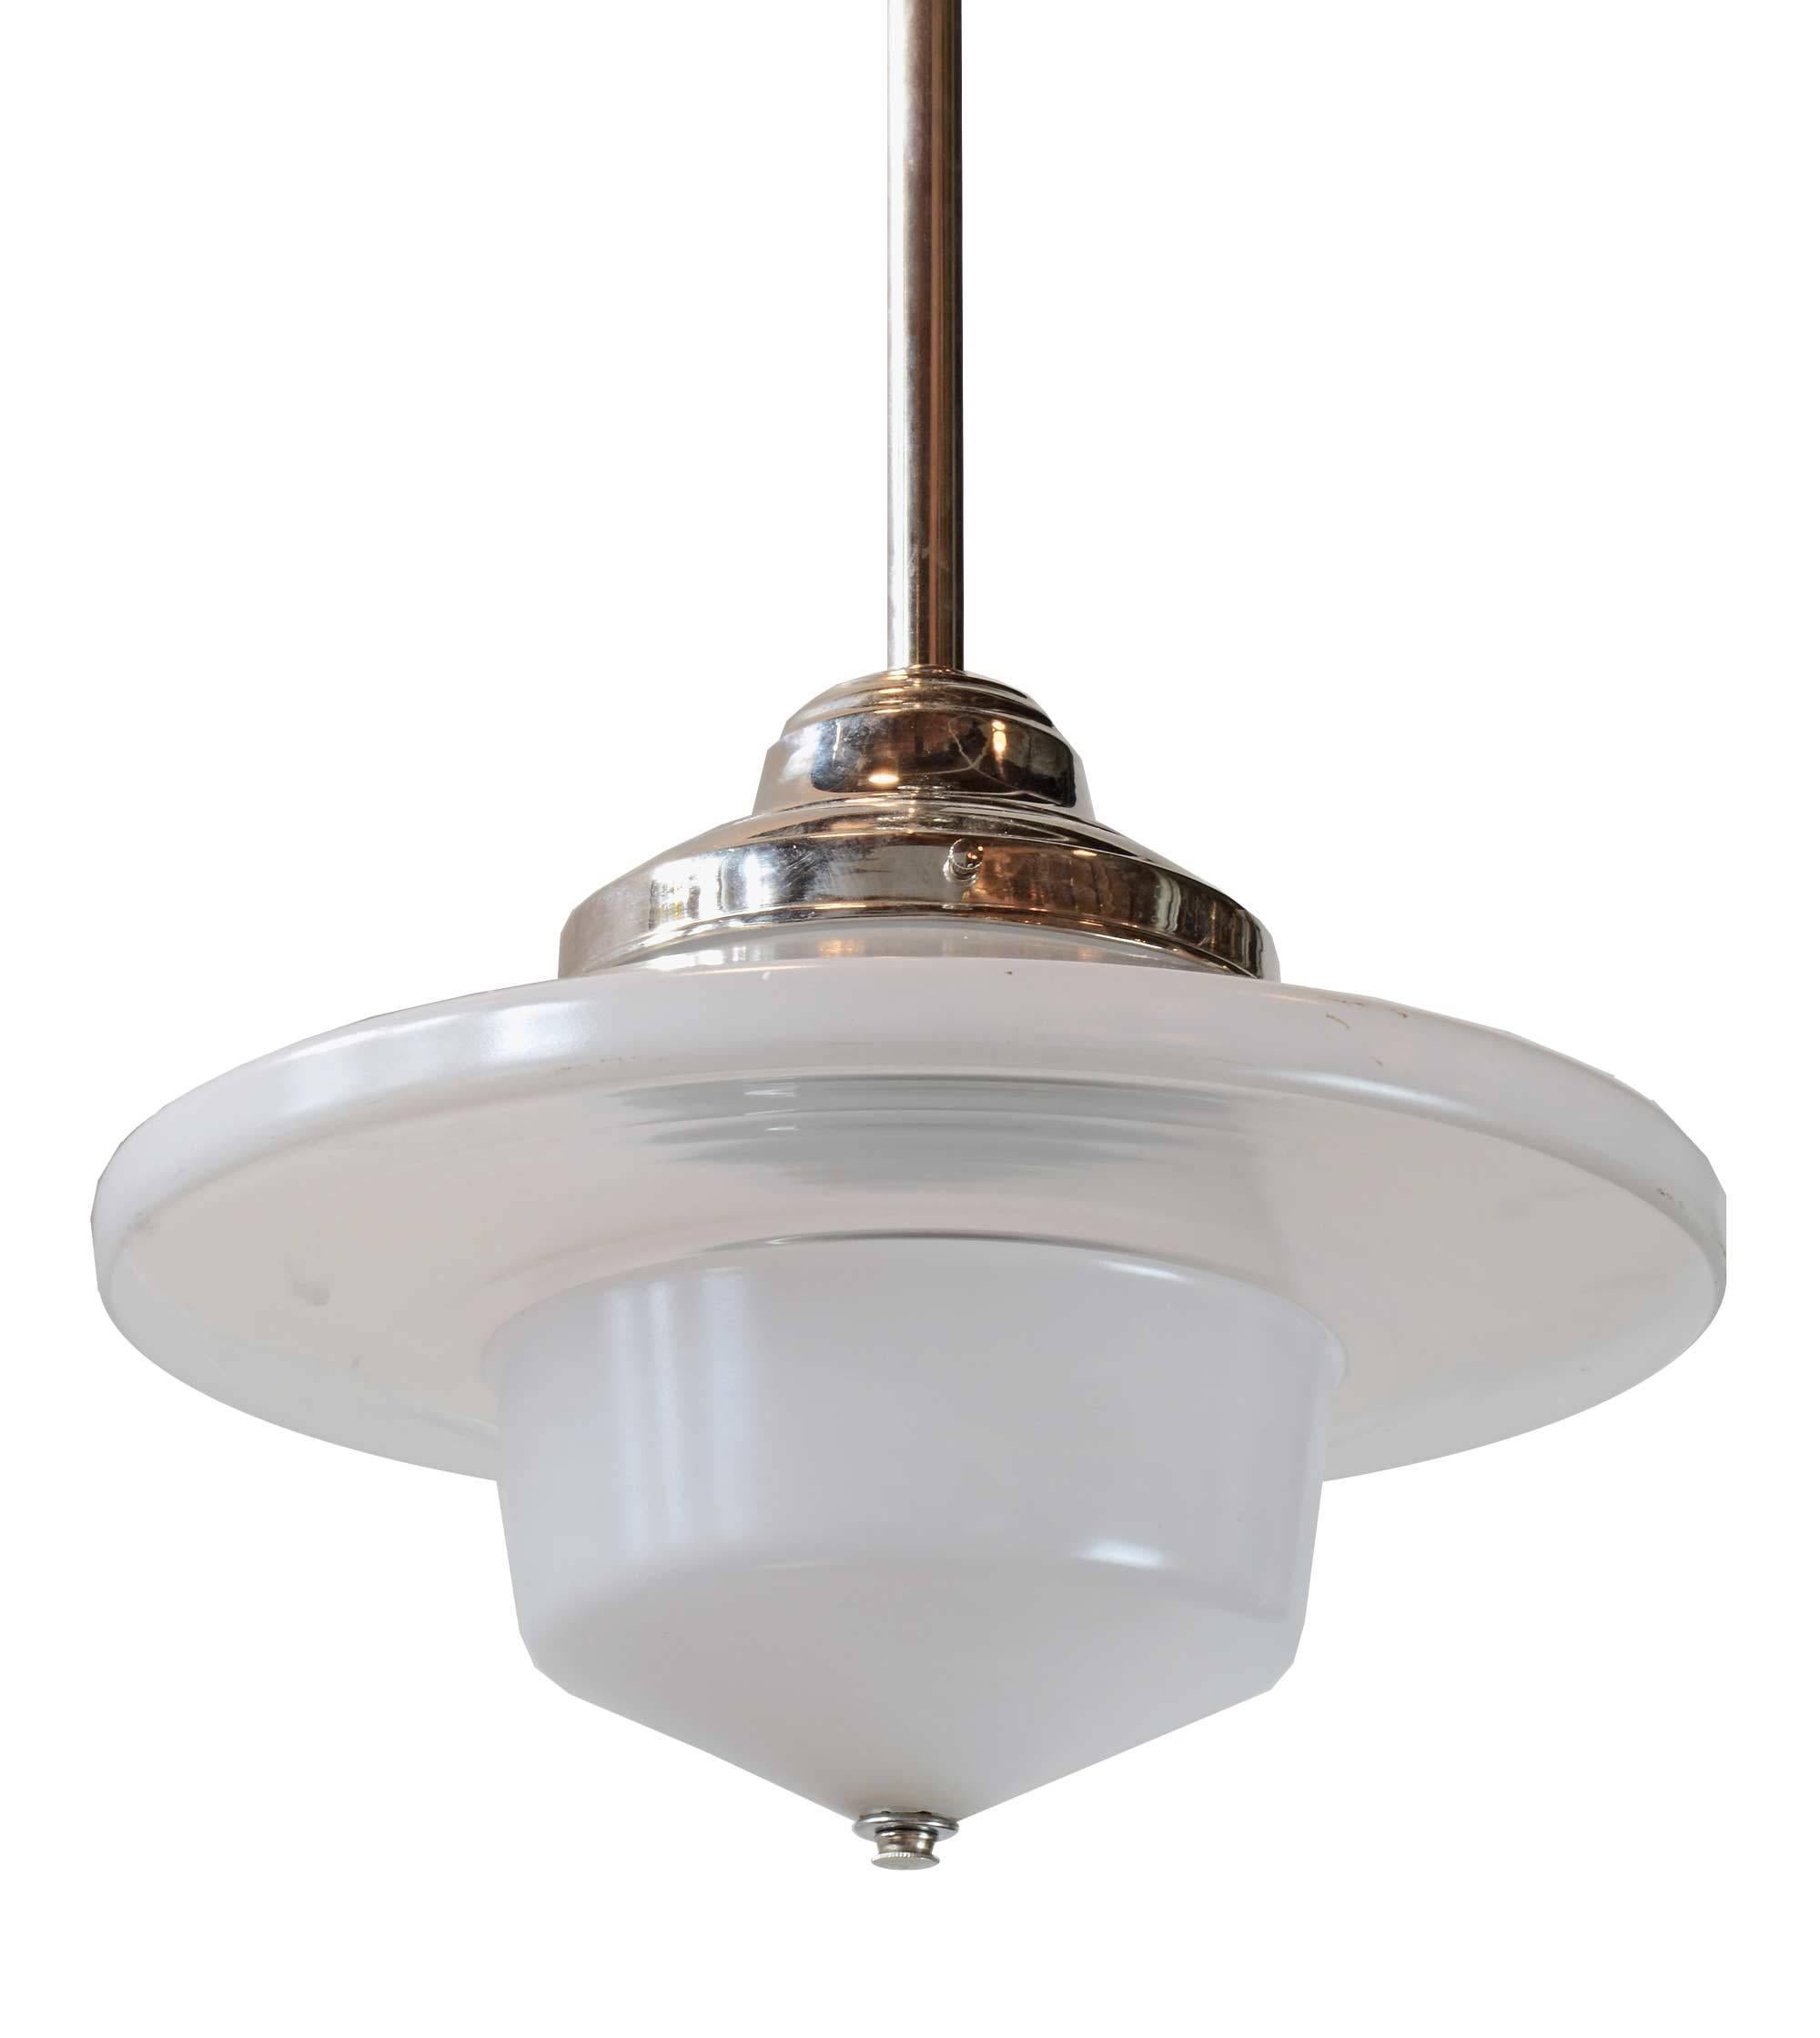 Industrial Early American Translucent White and Clear Glass Shade with Chrome Pendant